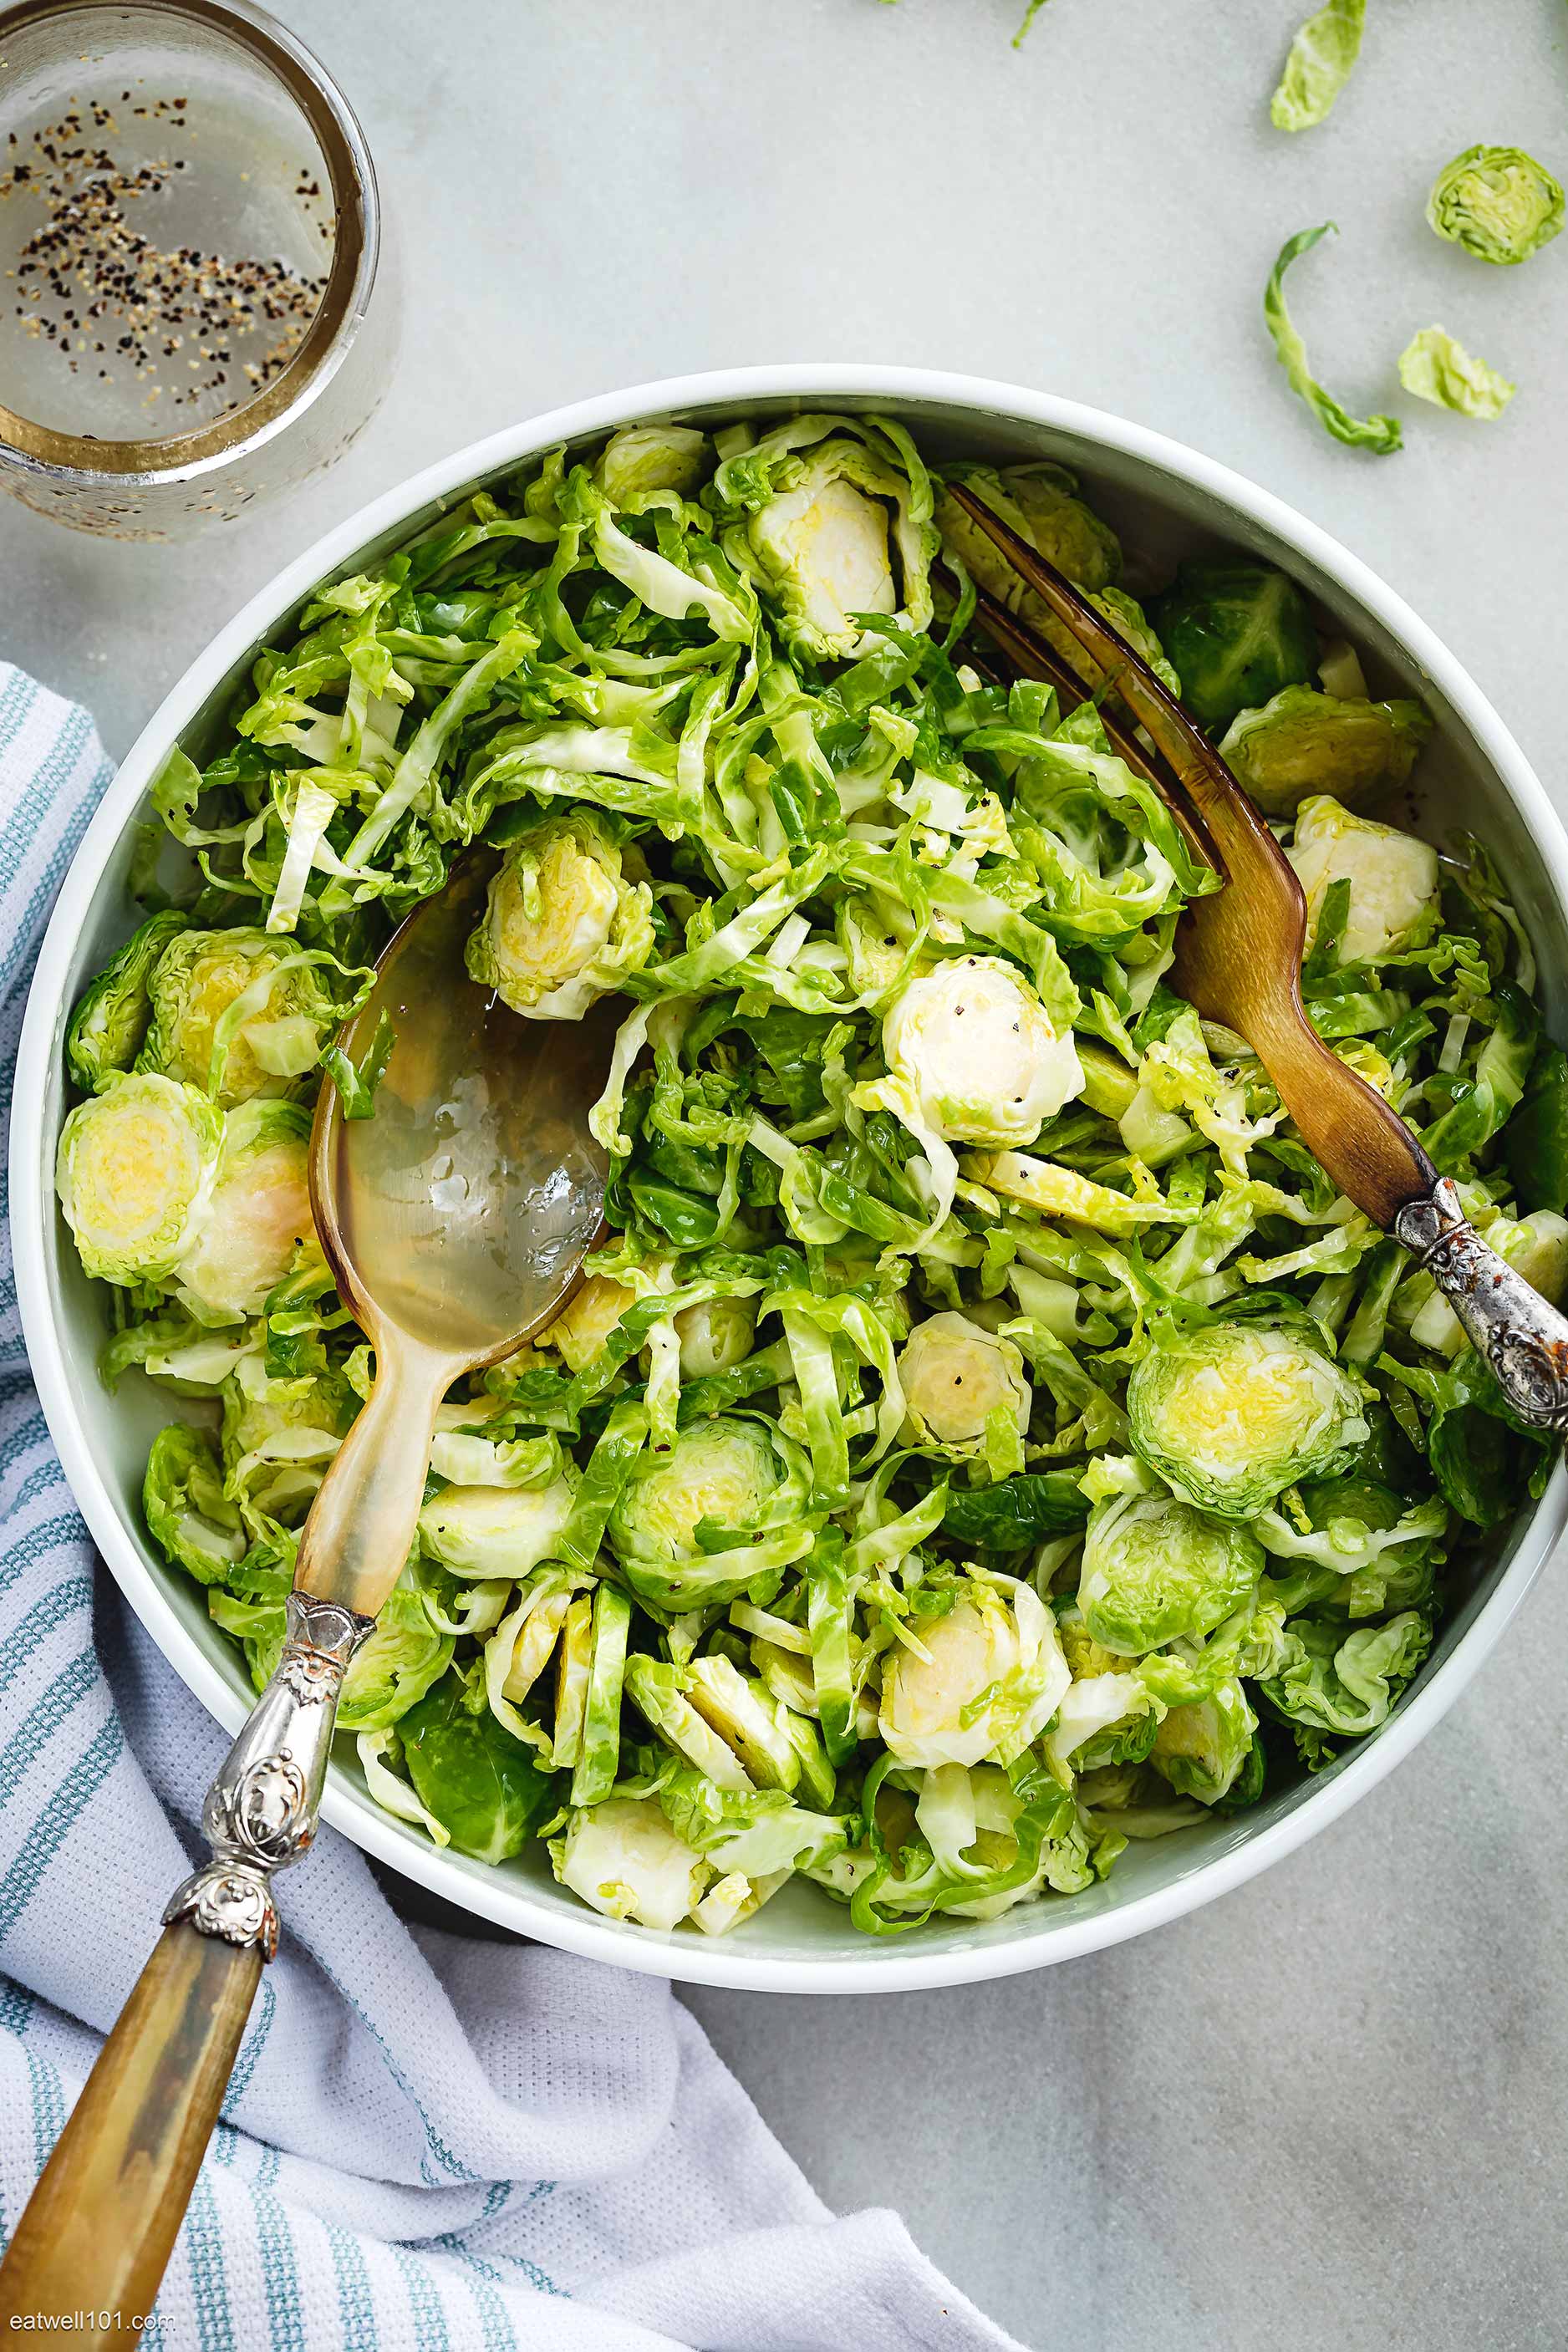 Shredded Brussels Sprouts salad